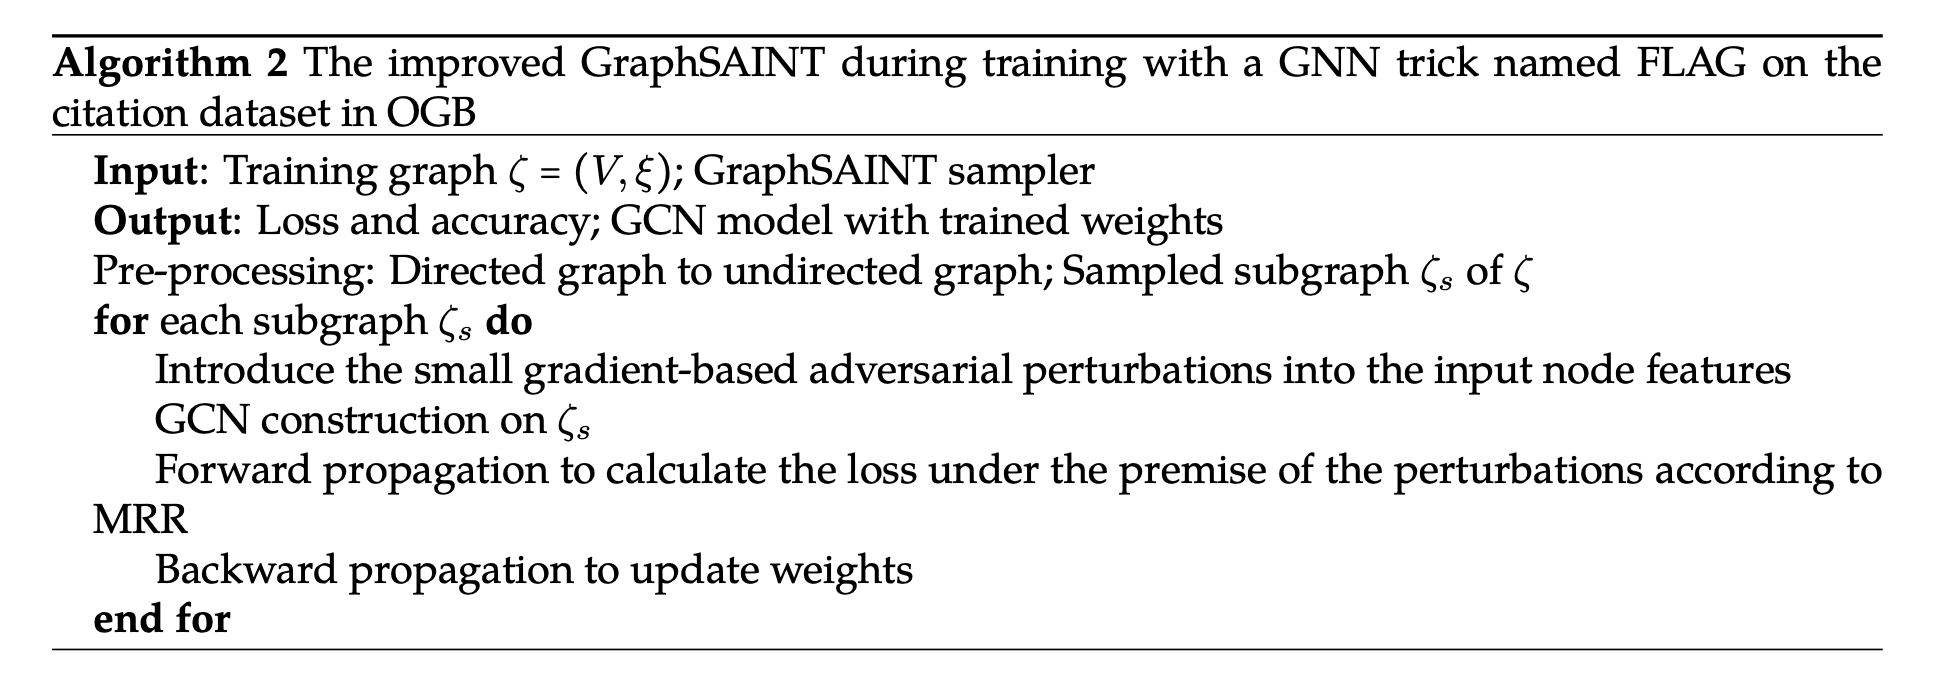 The improved GraphSAINT during training with a GNN trick named FLAG on the citation dataset in OGB